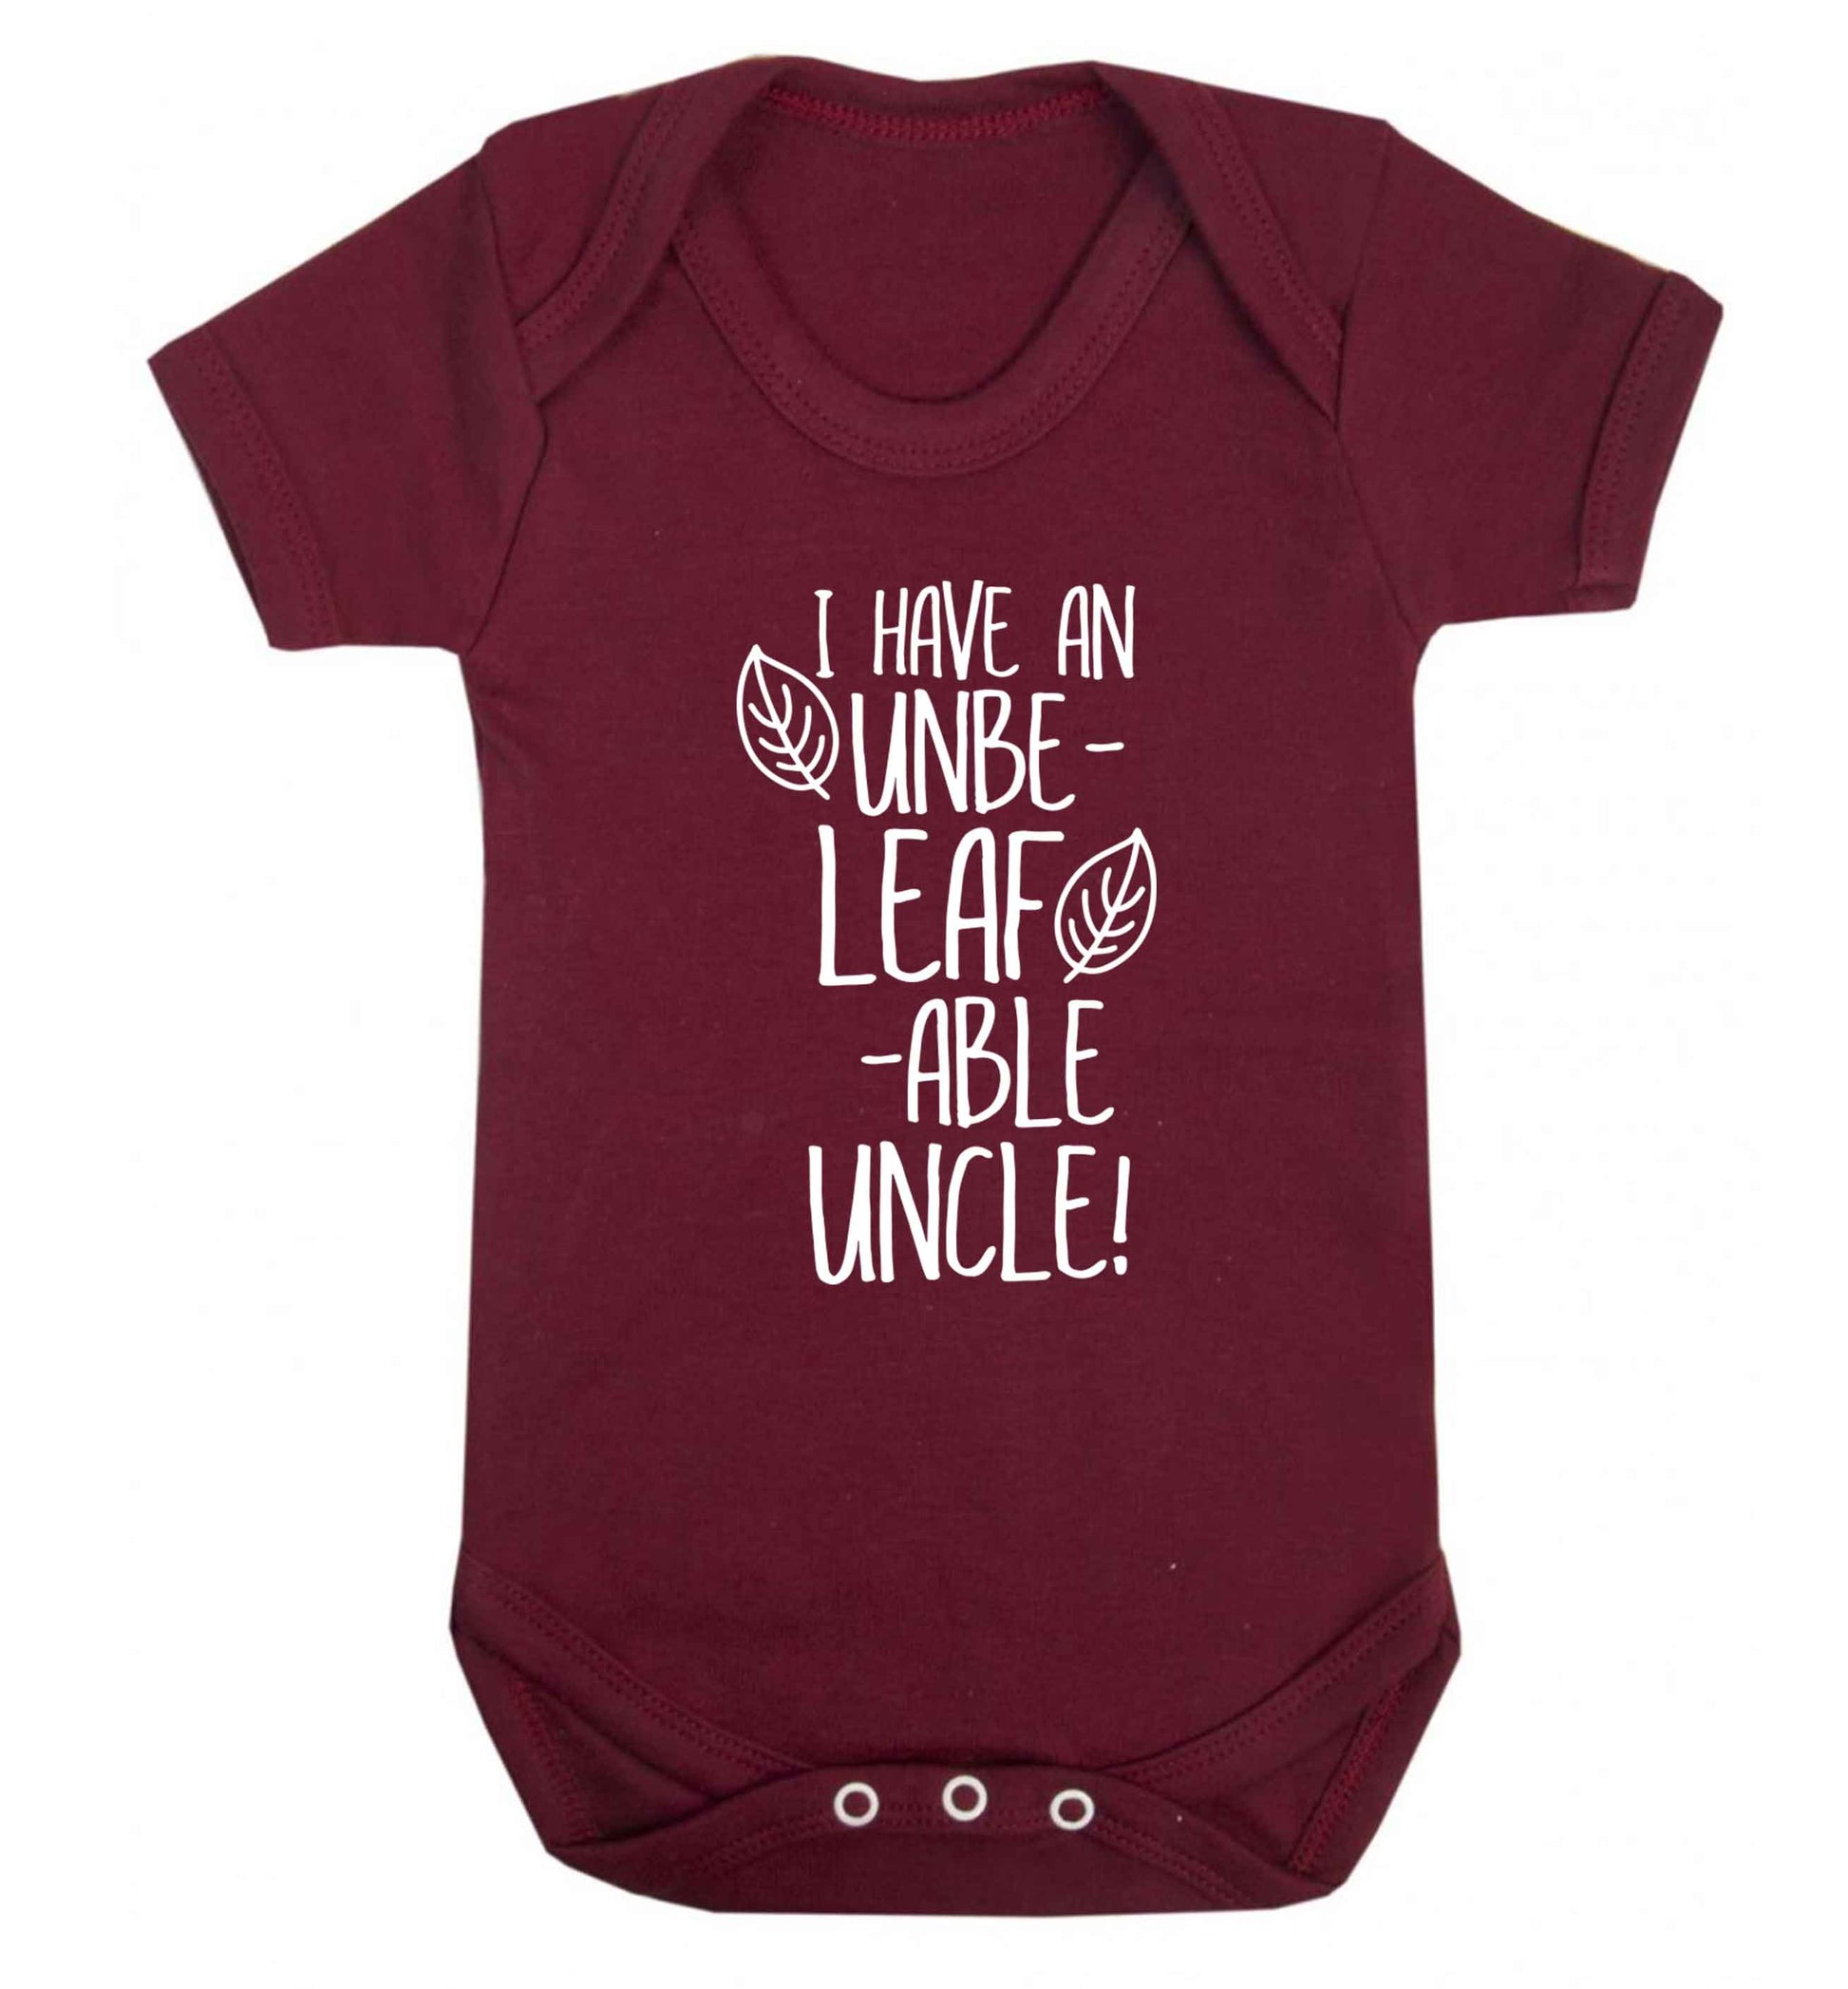 I have an unbe-leaf-able uncle Baby Vest maroon 18-24 months